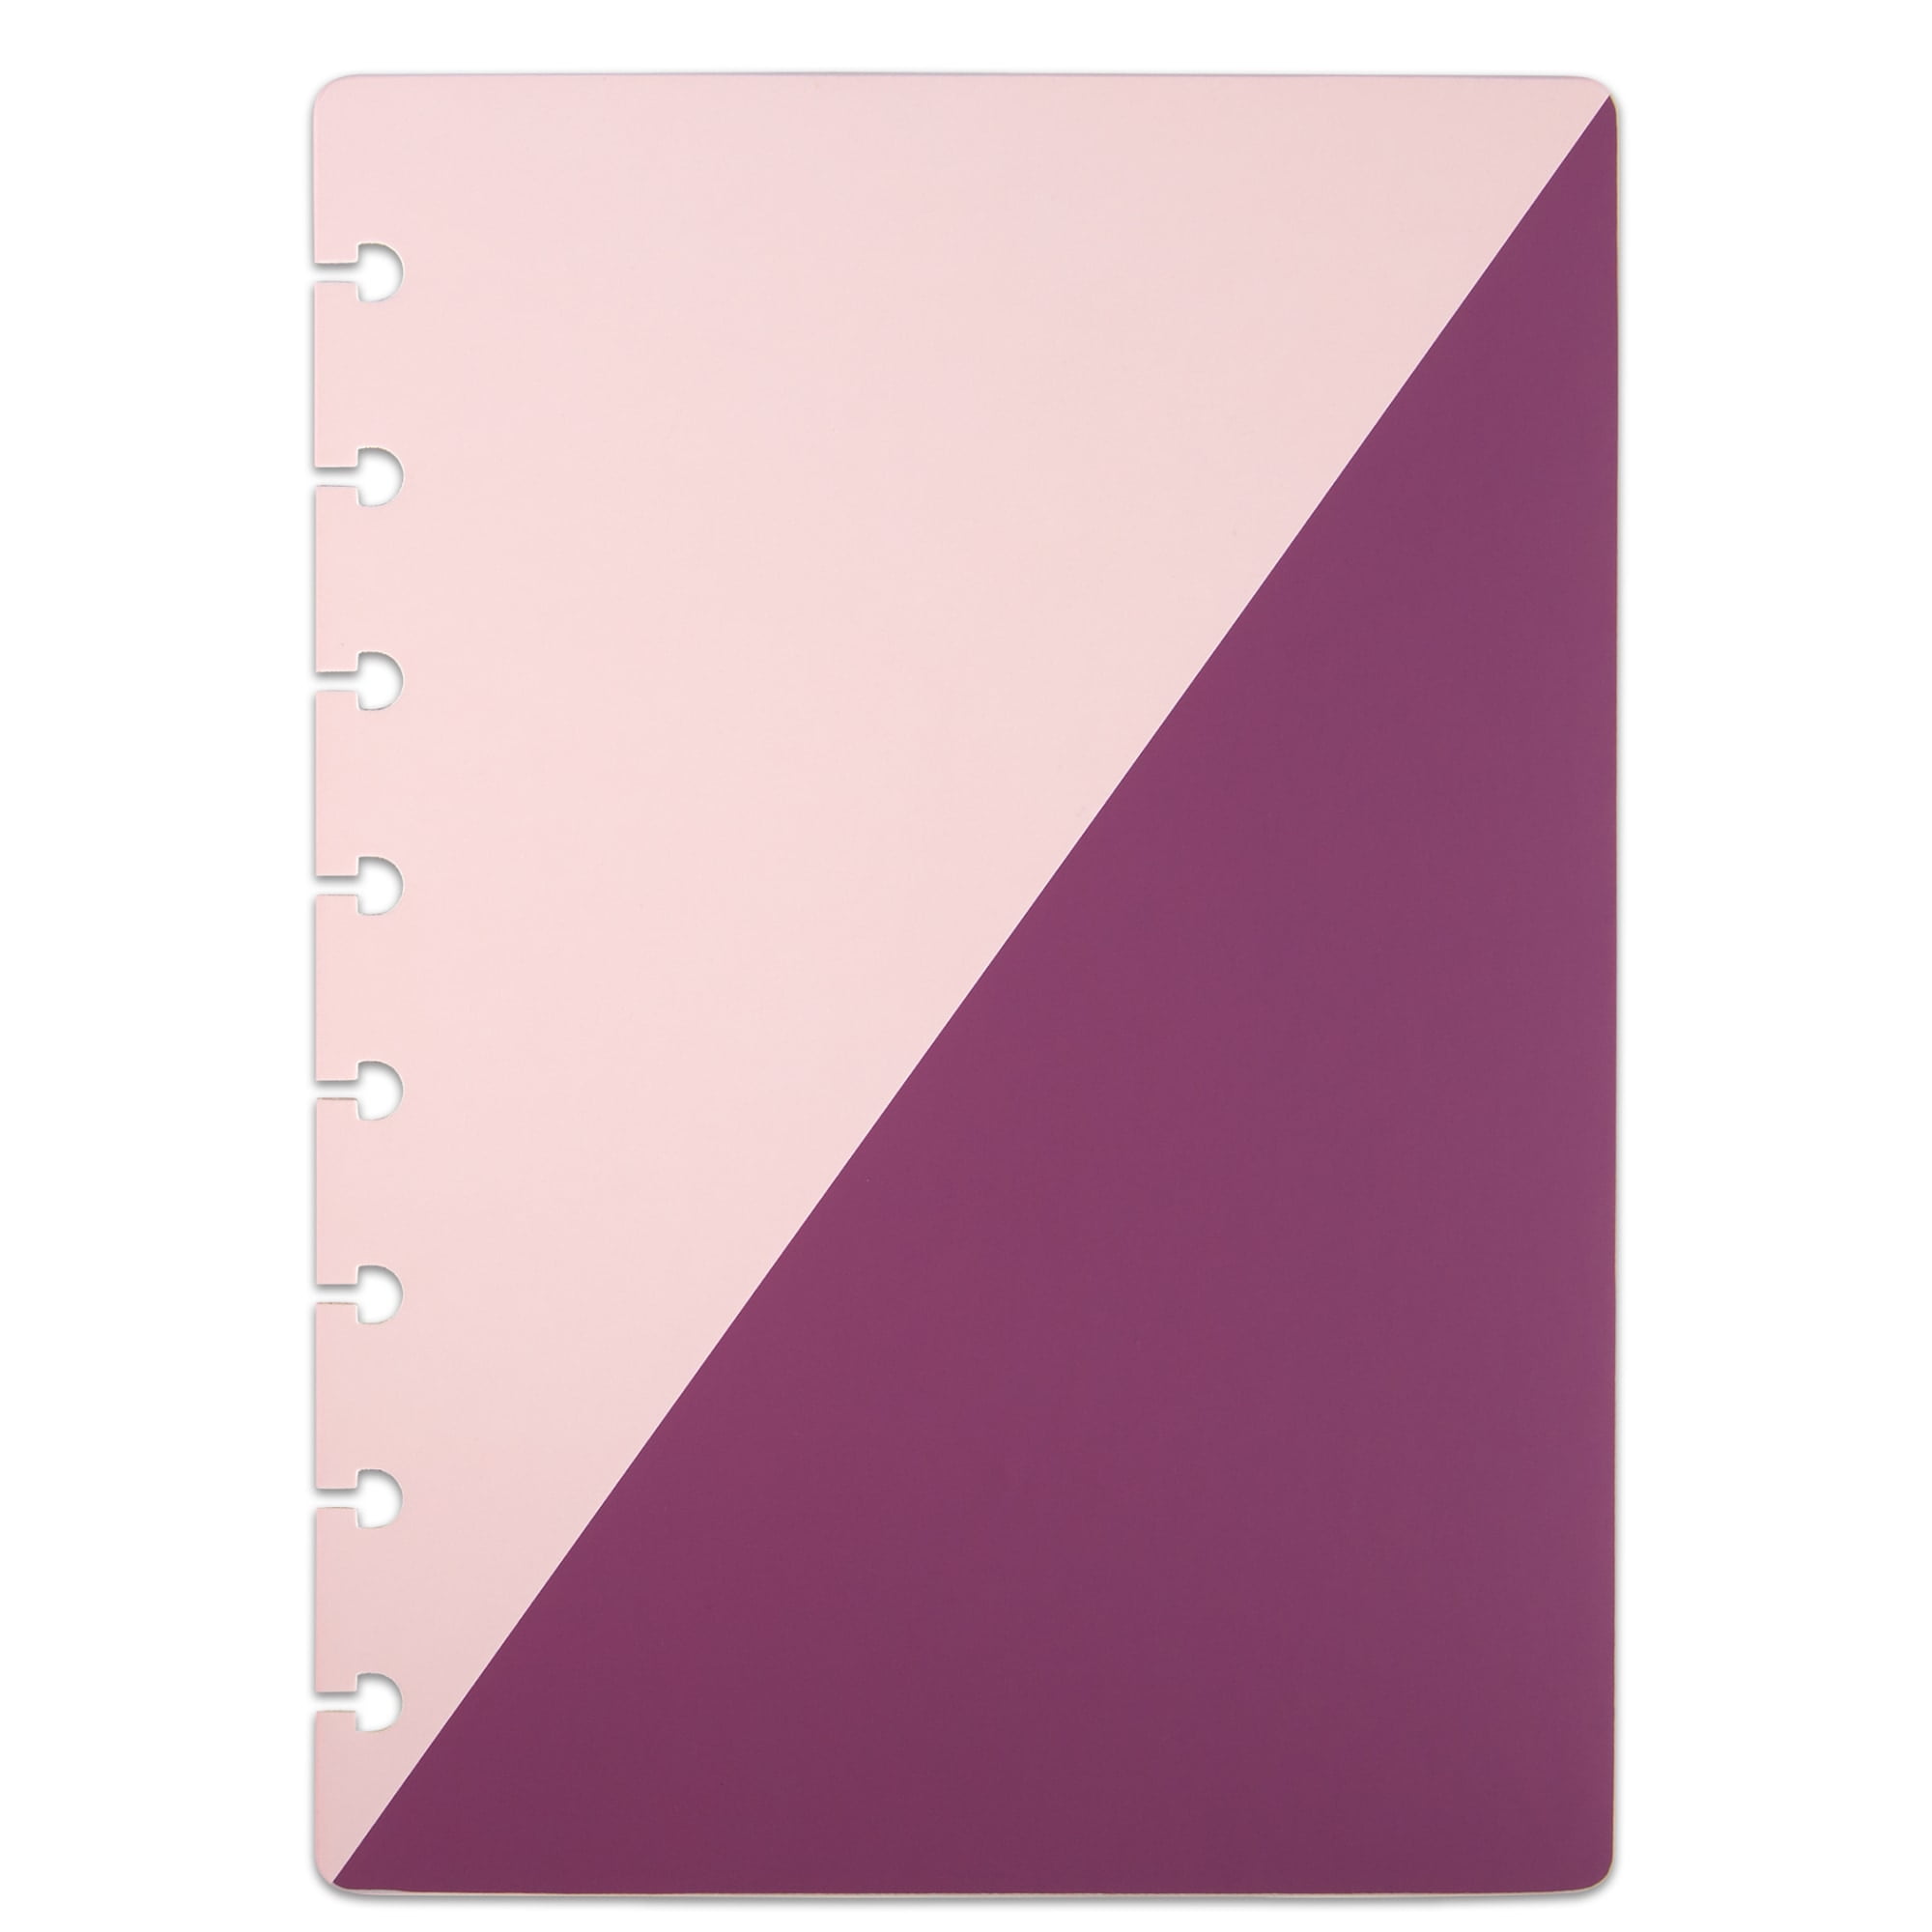 TUL Custom Note-taking System Discbound Notebook Covers 8.5x11 Pink Purple 2pk for sale online 